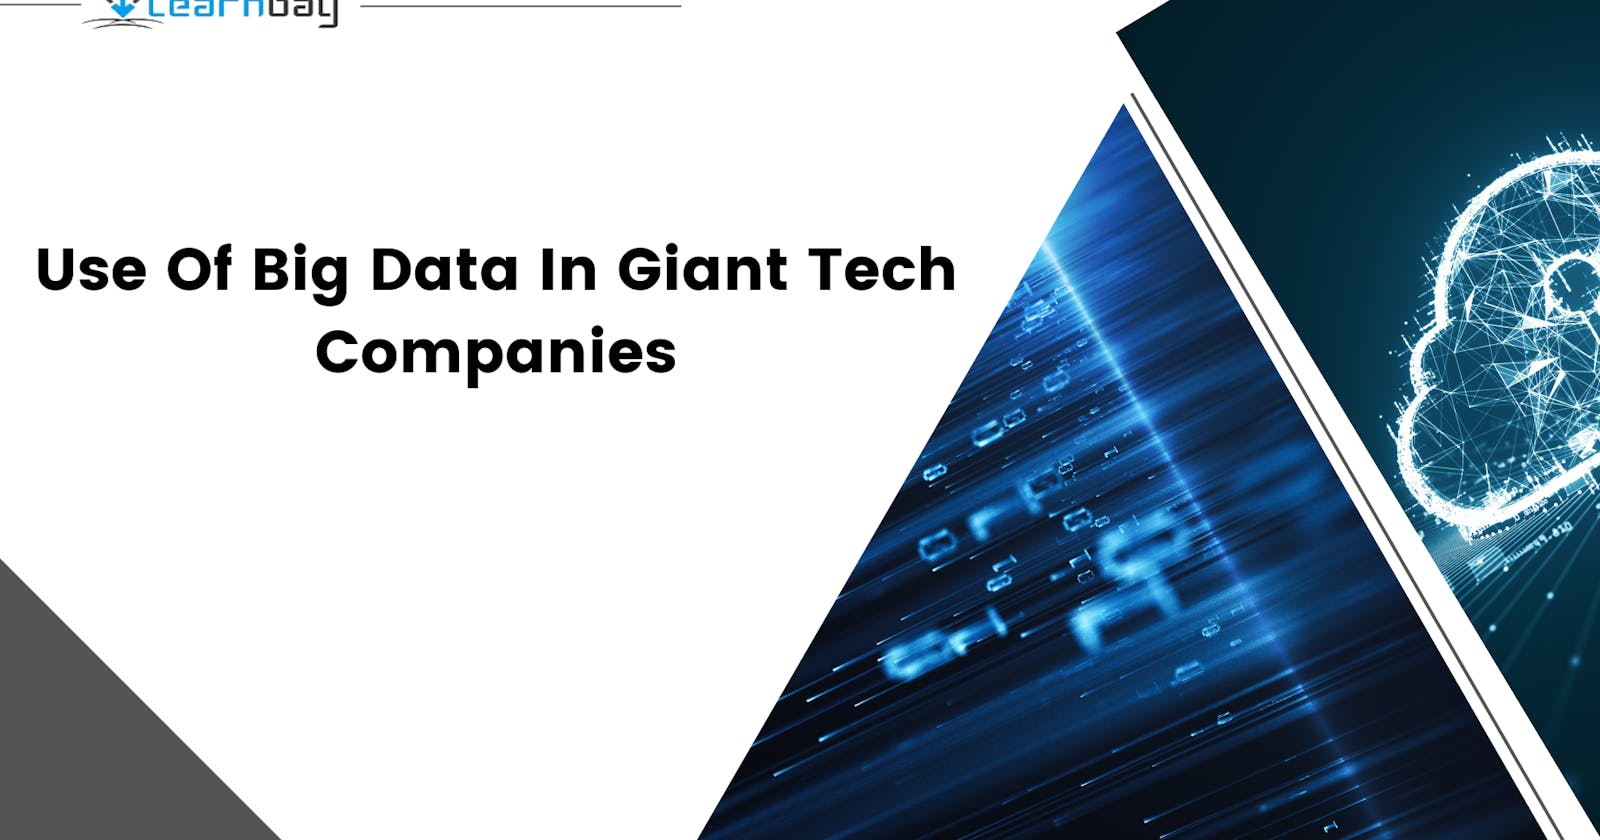 How is Big Data Used in Giant Tech Companies?